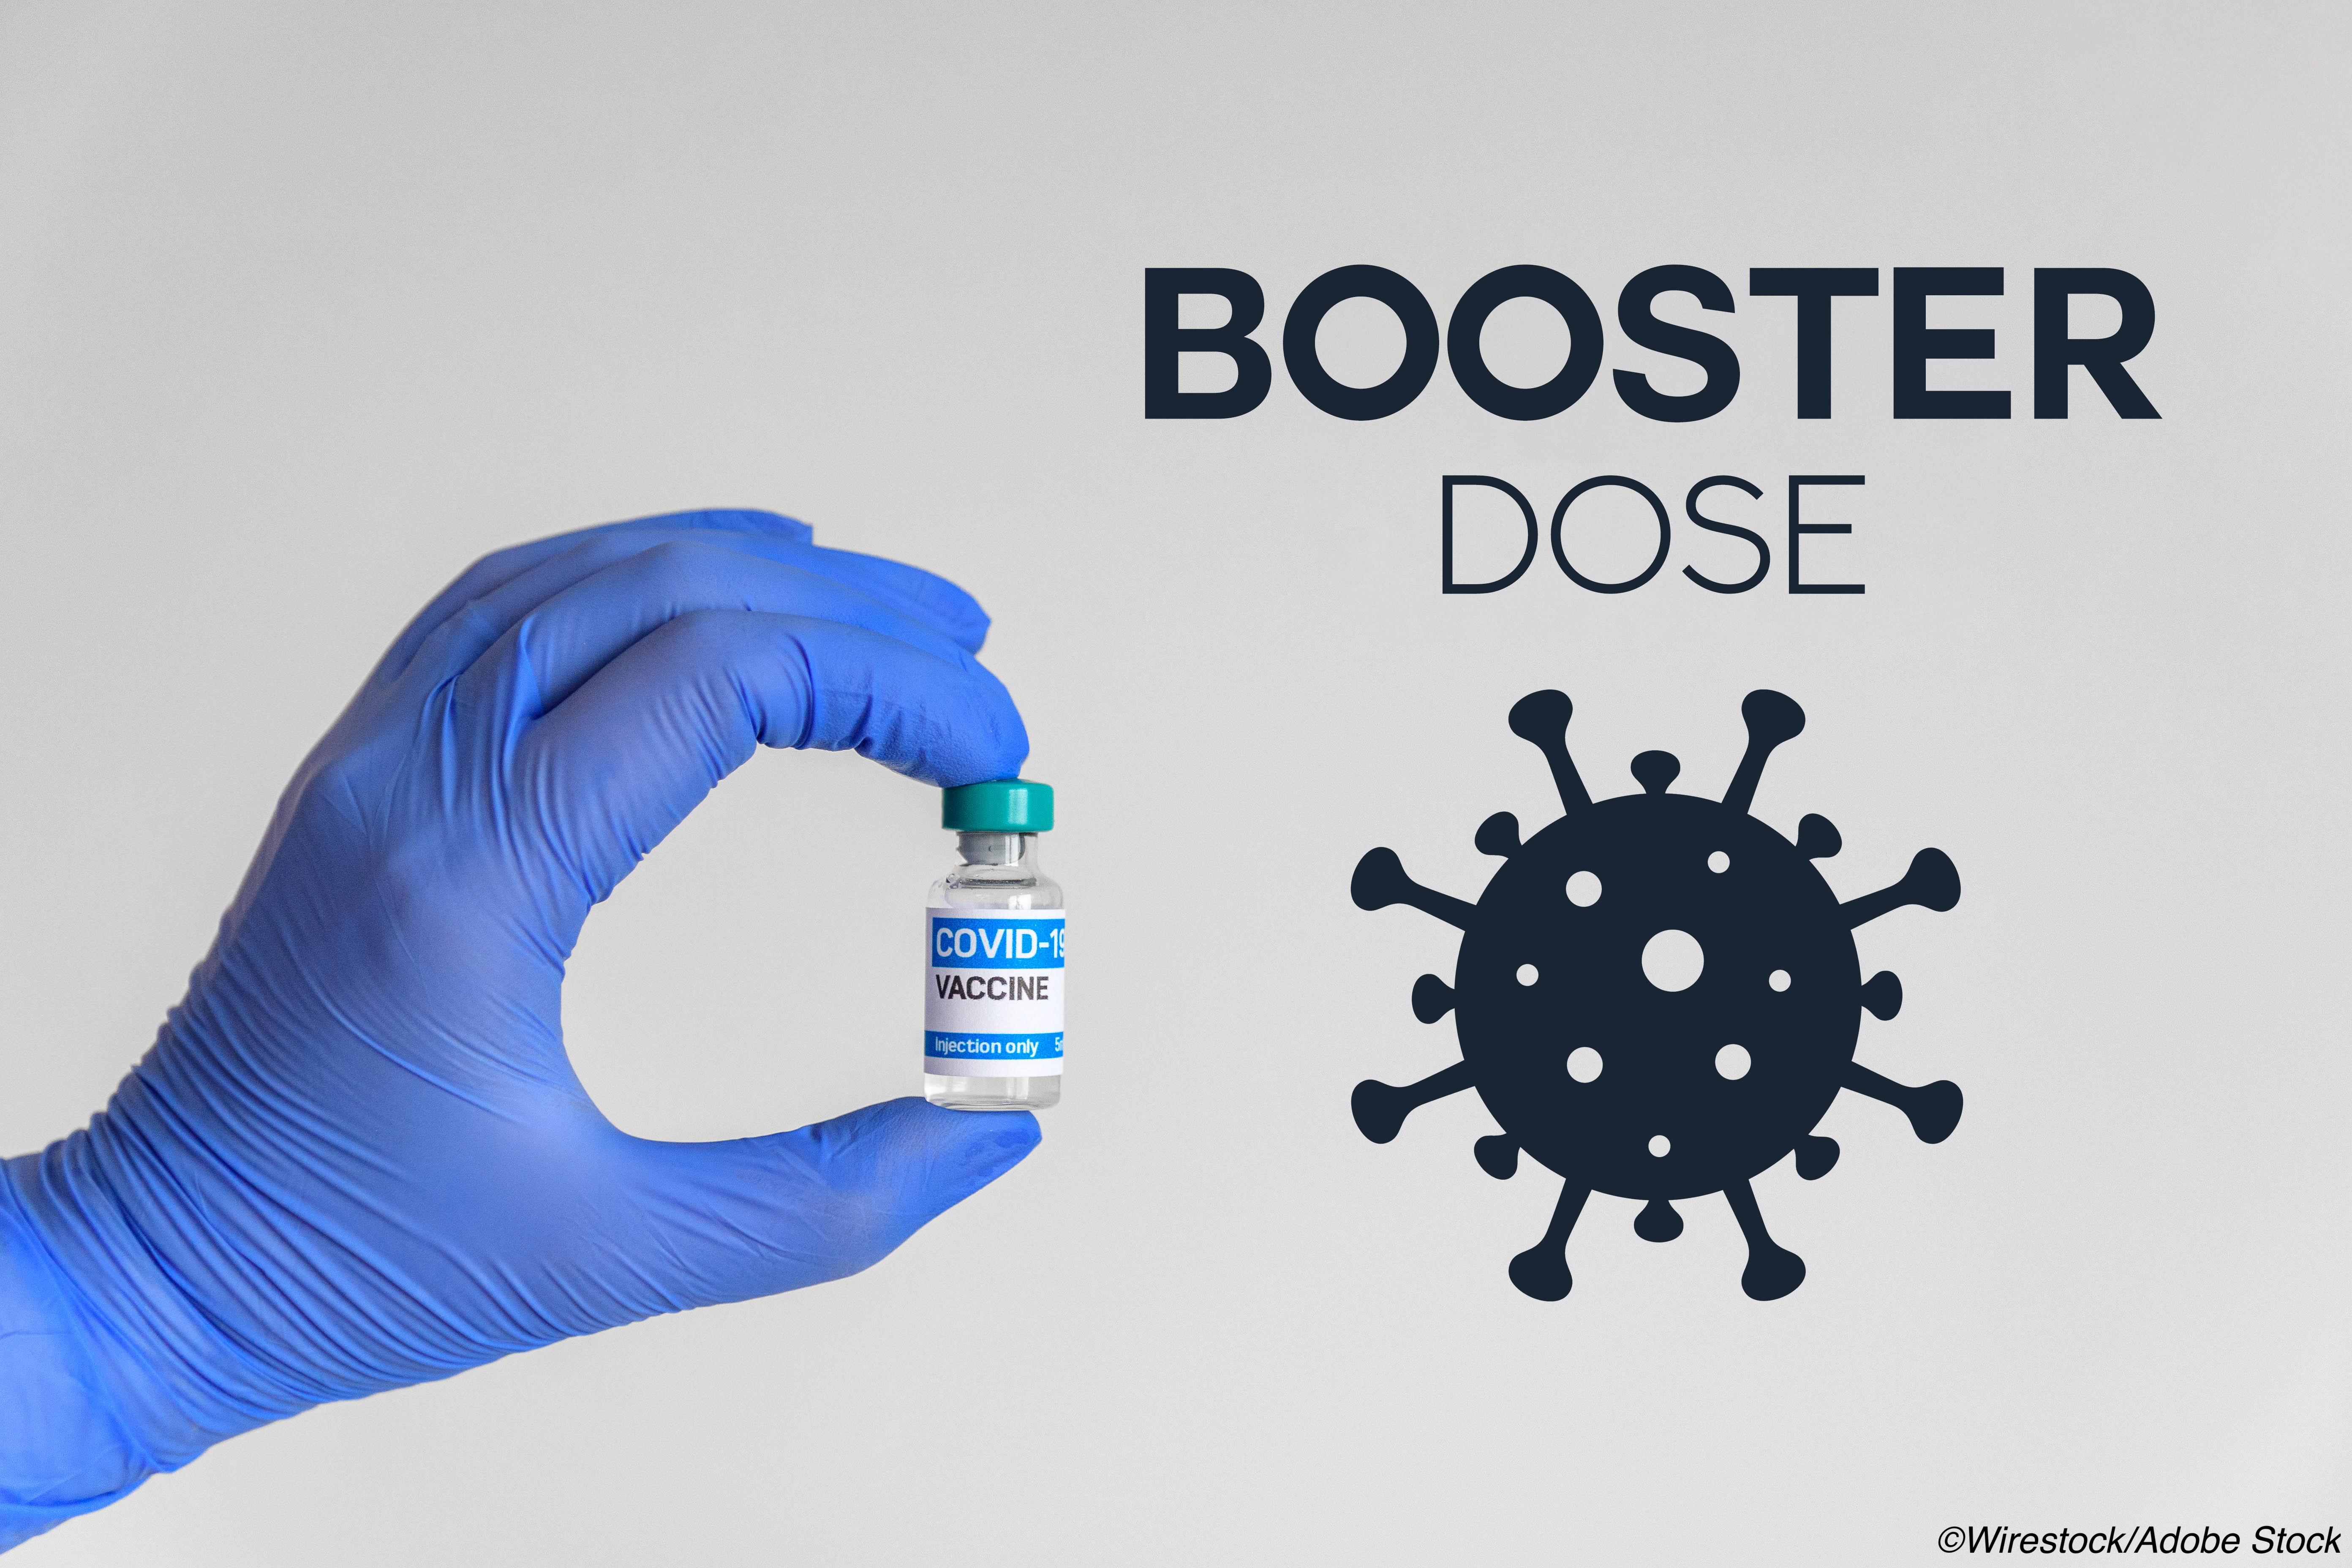 Range of Covid-19 Vaccines Show Activity for Booster Dosing in Study